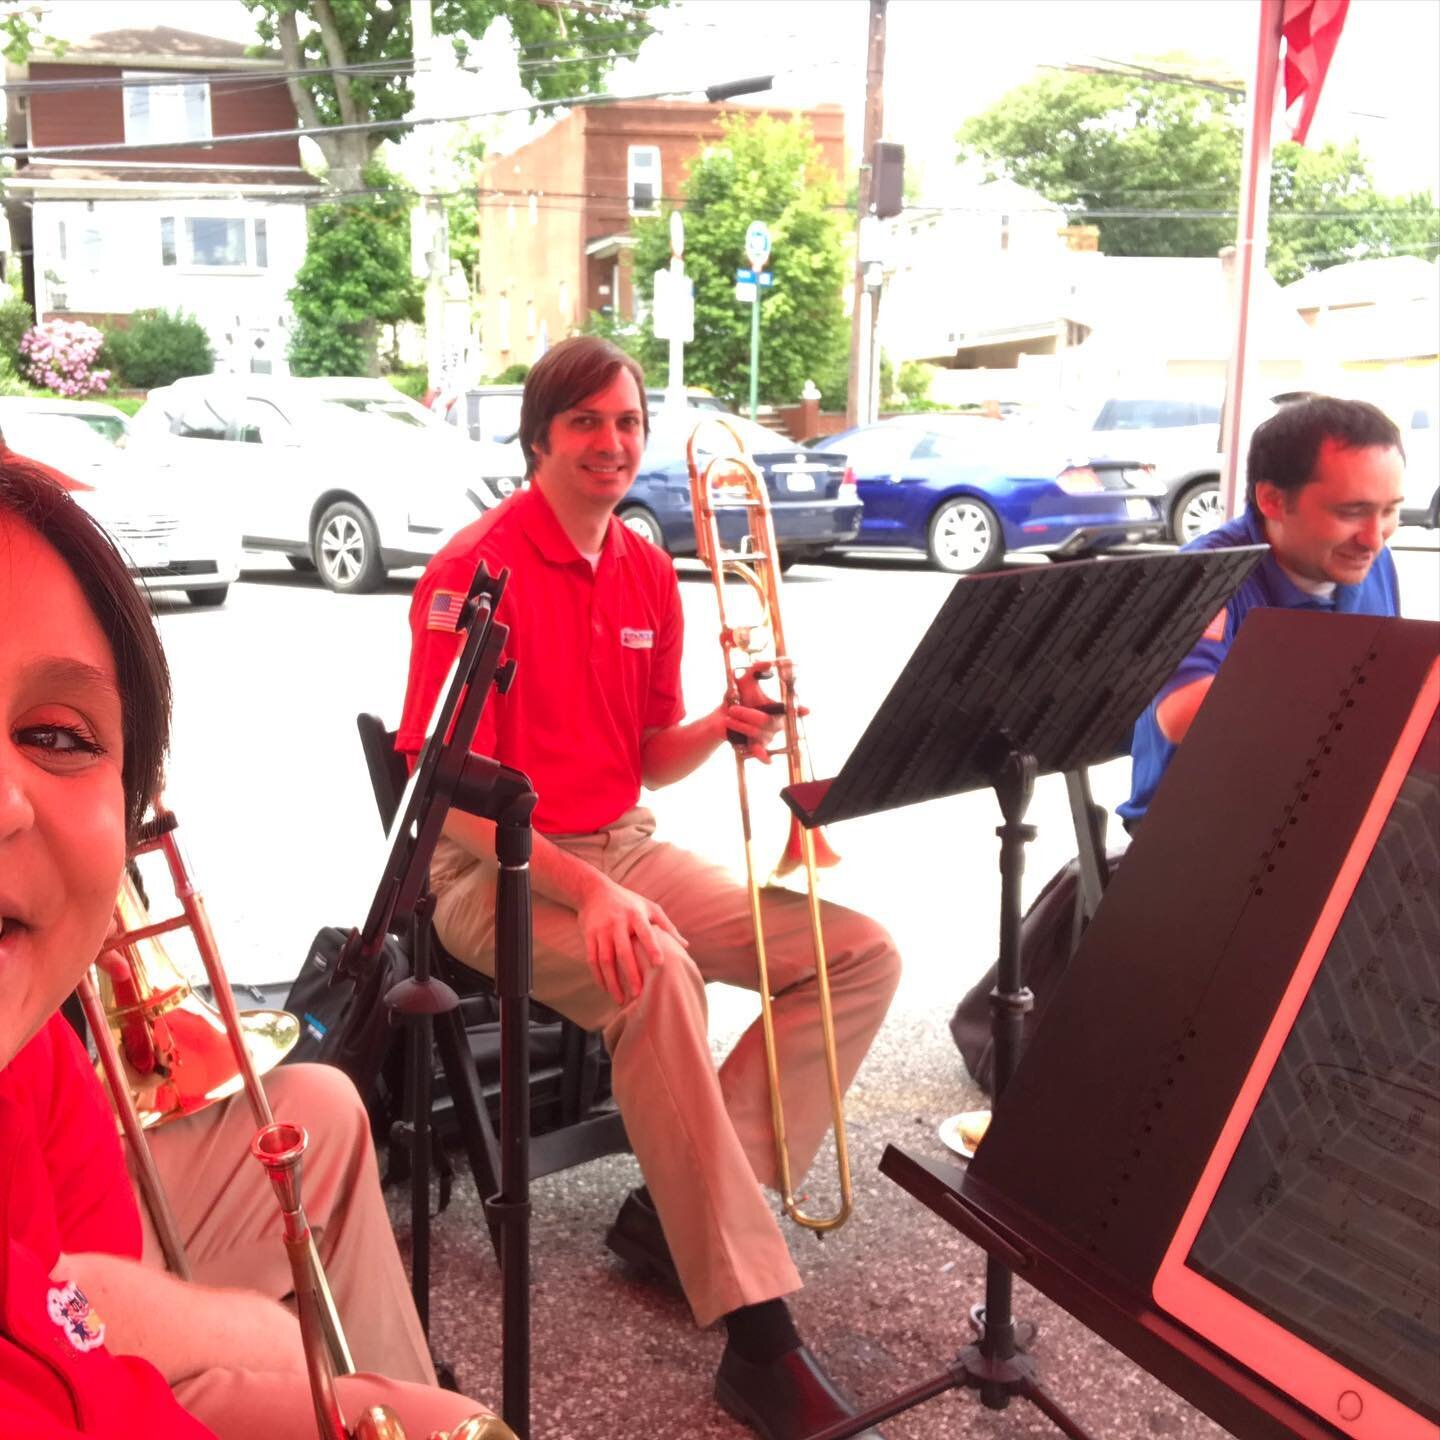 Very cool playing with @patriotbrass for Flag Day in Staten Island! Awesome Veterans at the concert, great people who run these events, and @manhattanskier broke out the tenor horn! (@andykemp_tpt and @rmcbridedrums were on the other side 💪🏽)
.
.
.